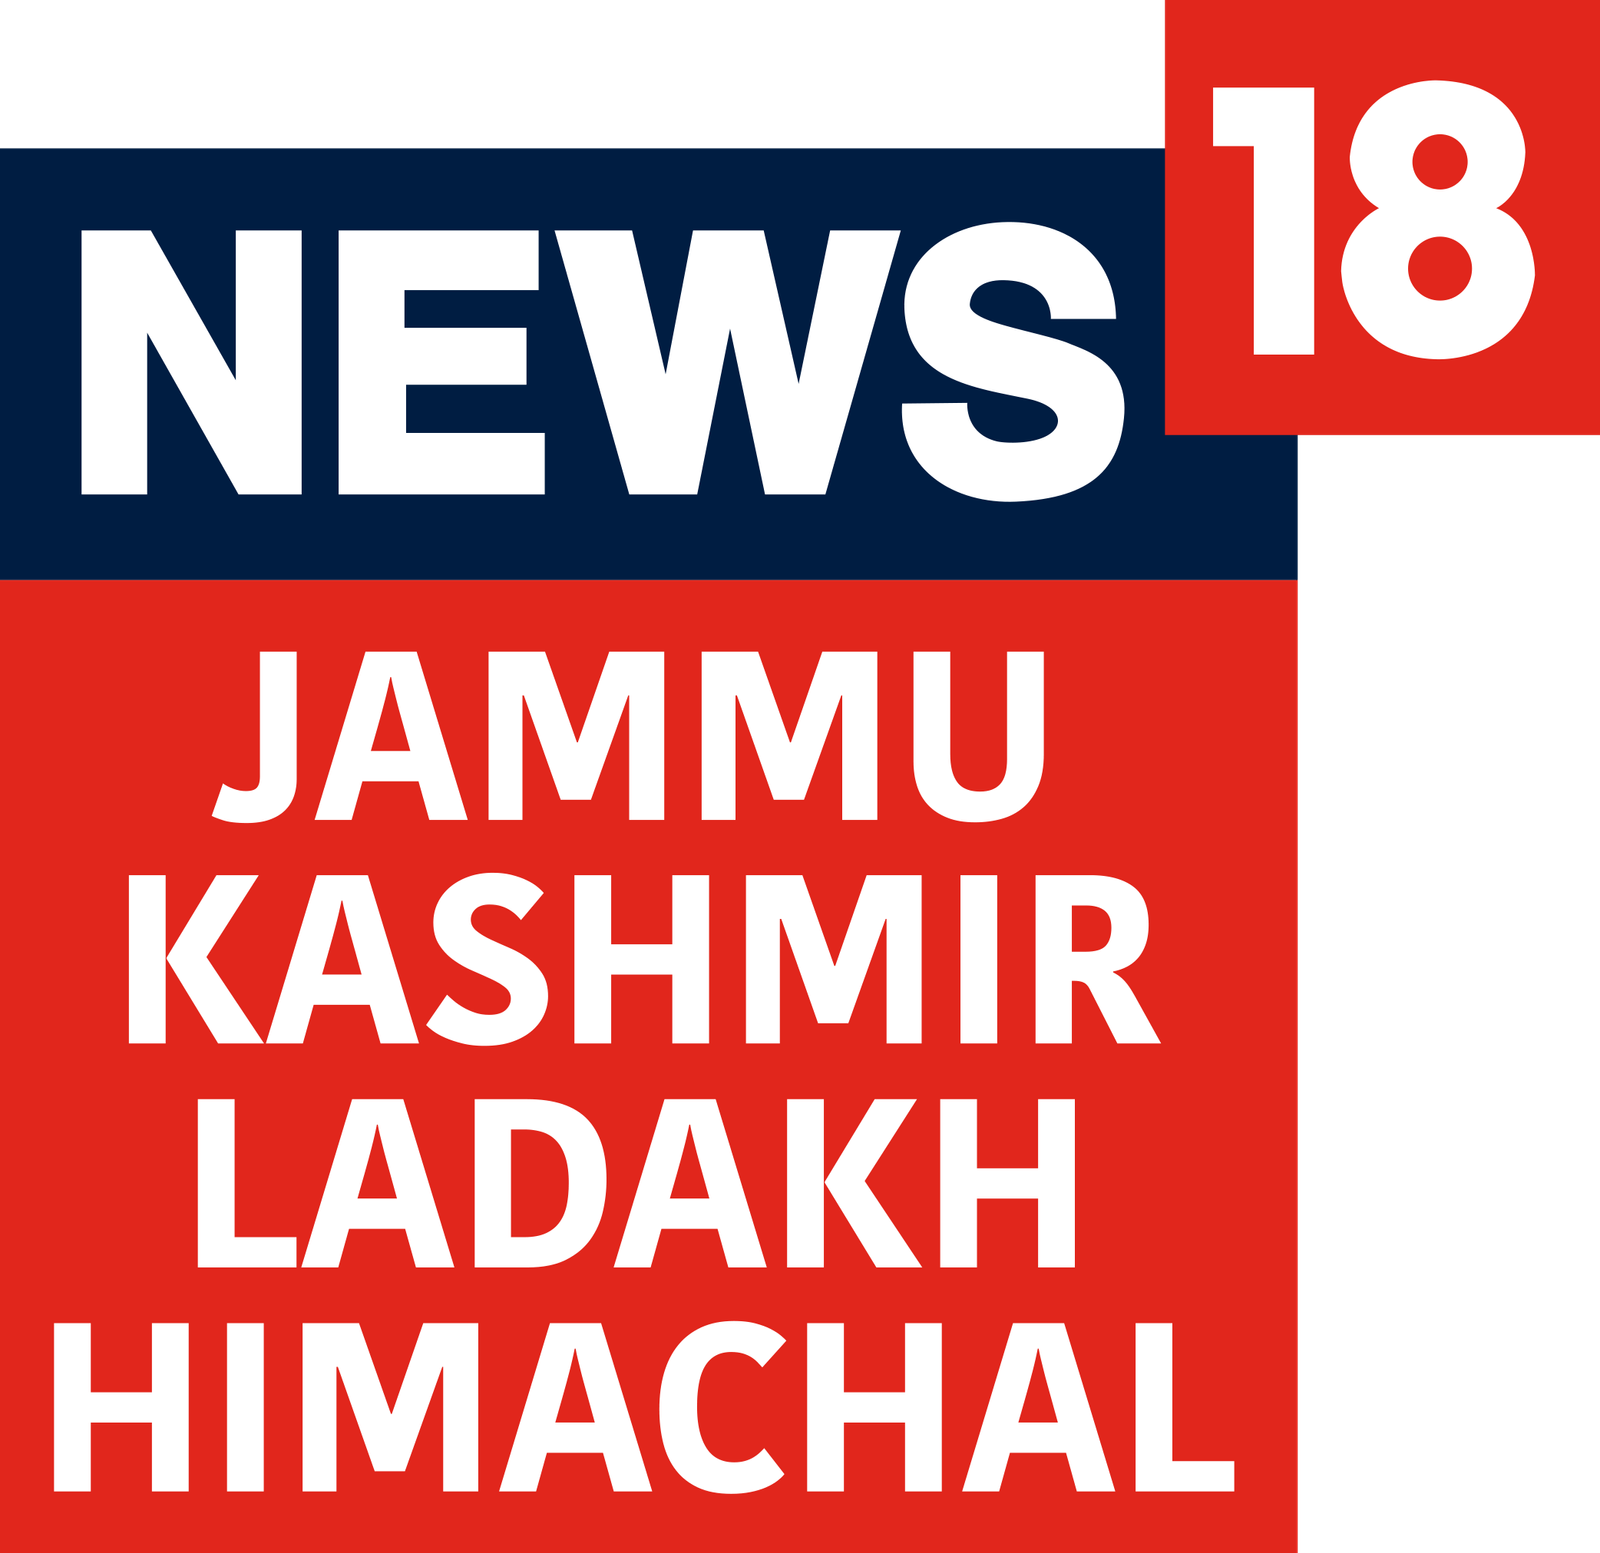 News18 JKLH vanquishes competition; acquires leadership position within 50 days of launch